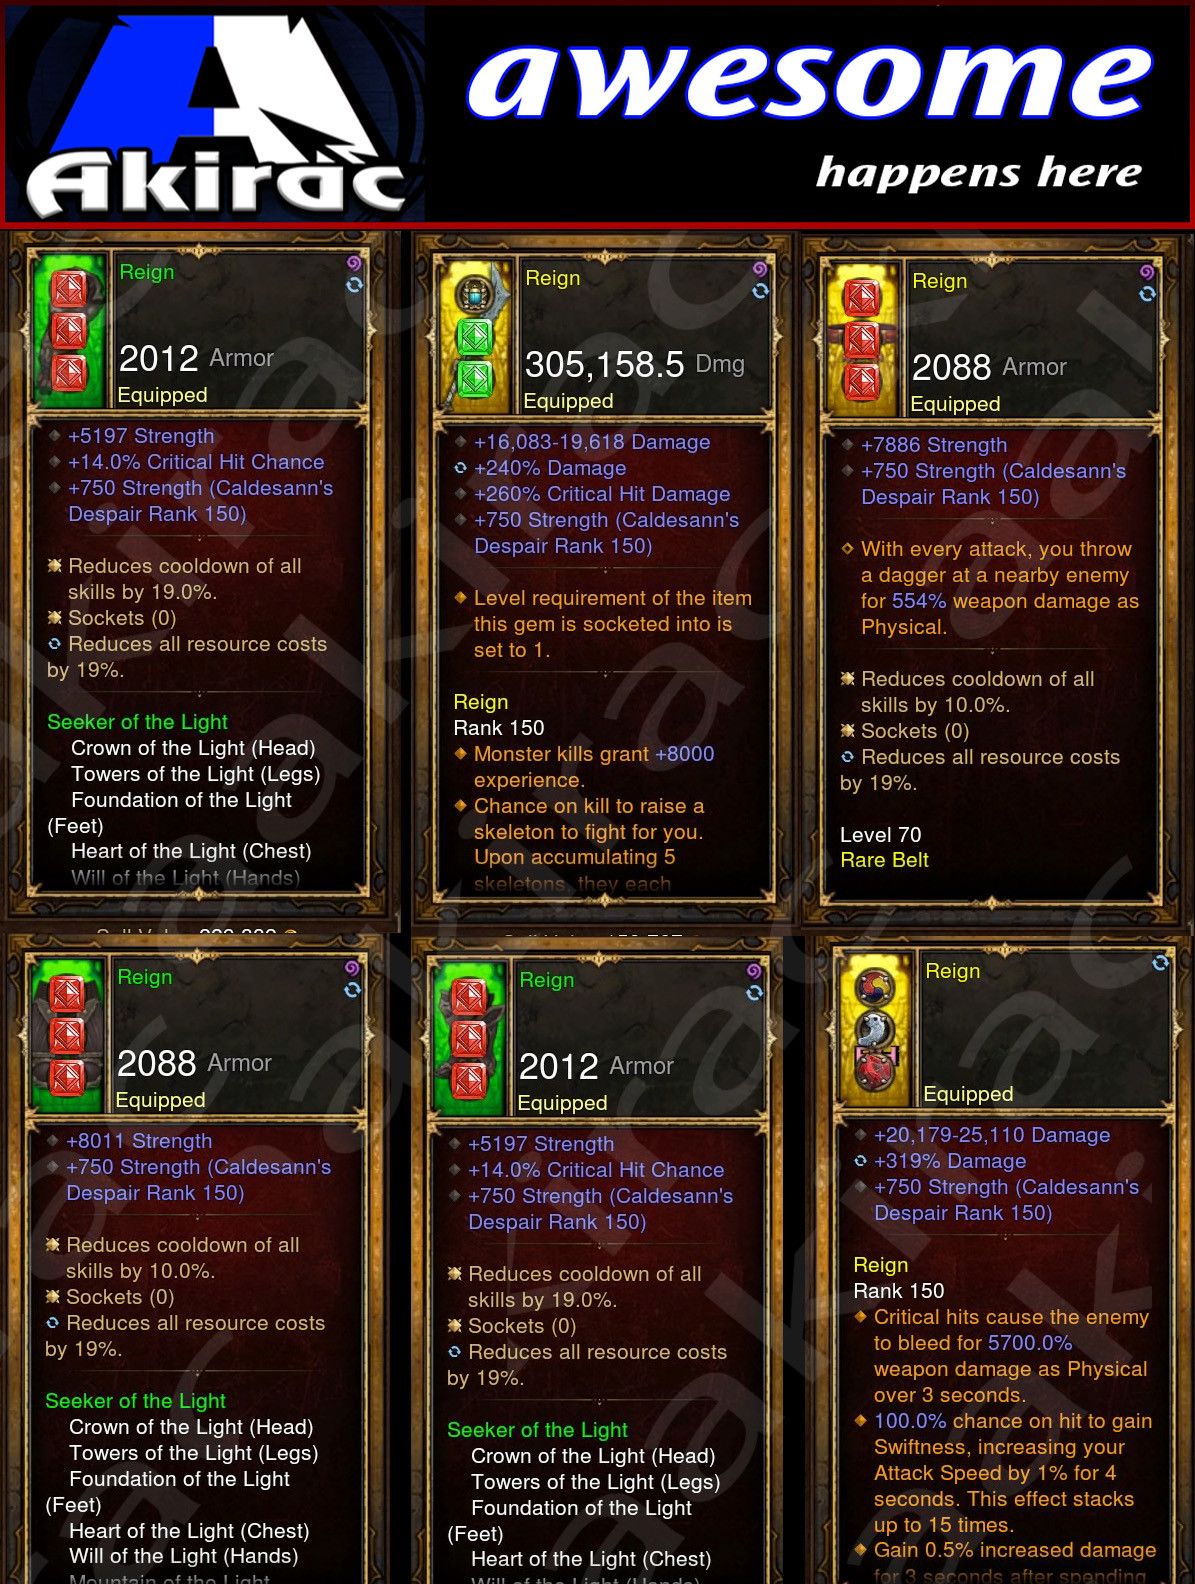 Diablo 3 Immortal v2 Light Crusader Modded Set for Rift 150 Reign Diablo 3 Mods ROS Seasonal and Non Seasonal Save Mod - Modded Items and Gear - Hacks - Cheats - Trainers for Playstation 4 - Playstation 5 - Nintendo Switch - Xbox One